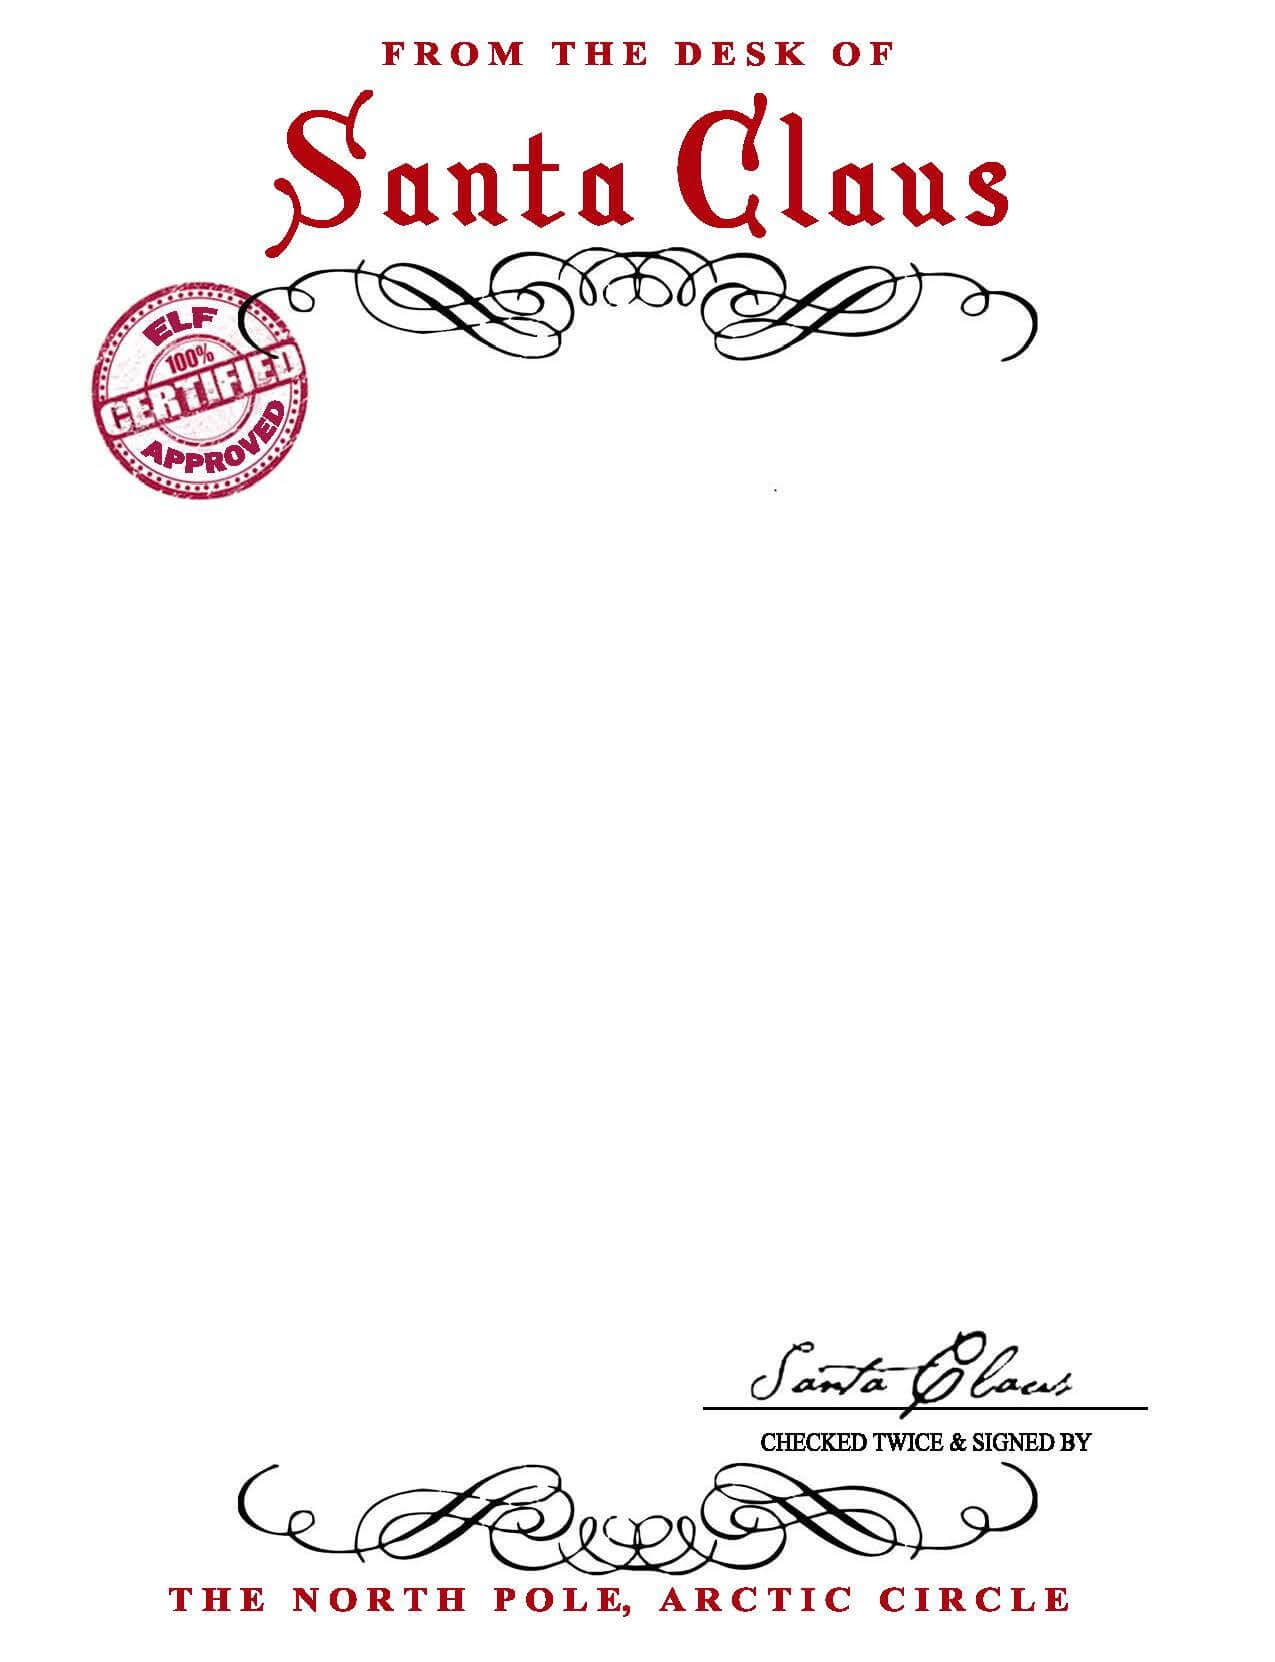 Santa Claus Letterhead.. Will Bring Lots Of Joy To Children In Santa Letter Template Word